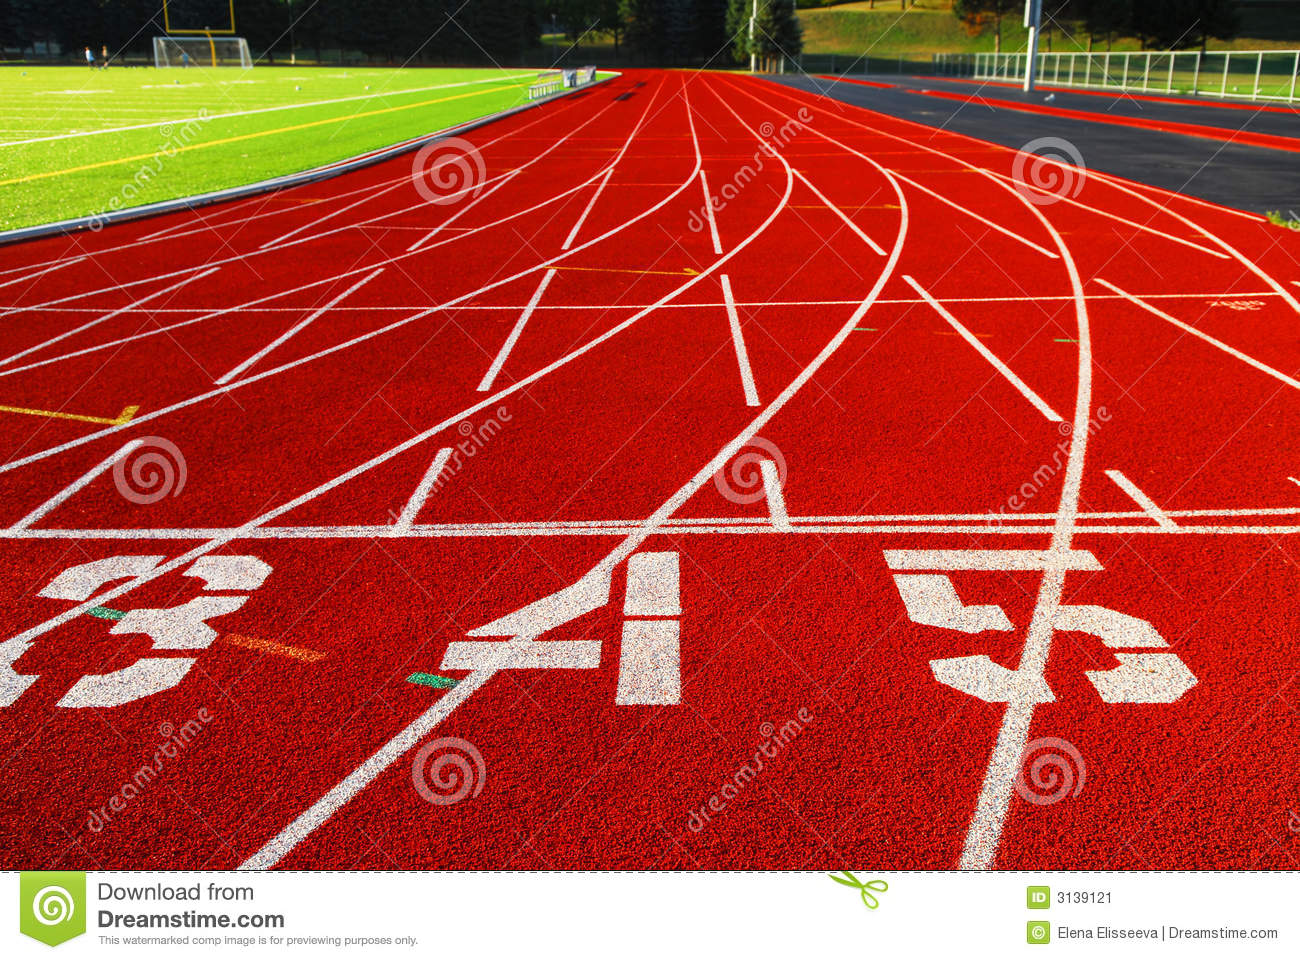 Lanes Of A Red Race Track With Numbers And Green Football Field